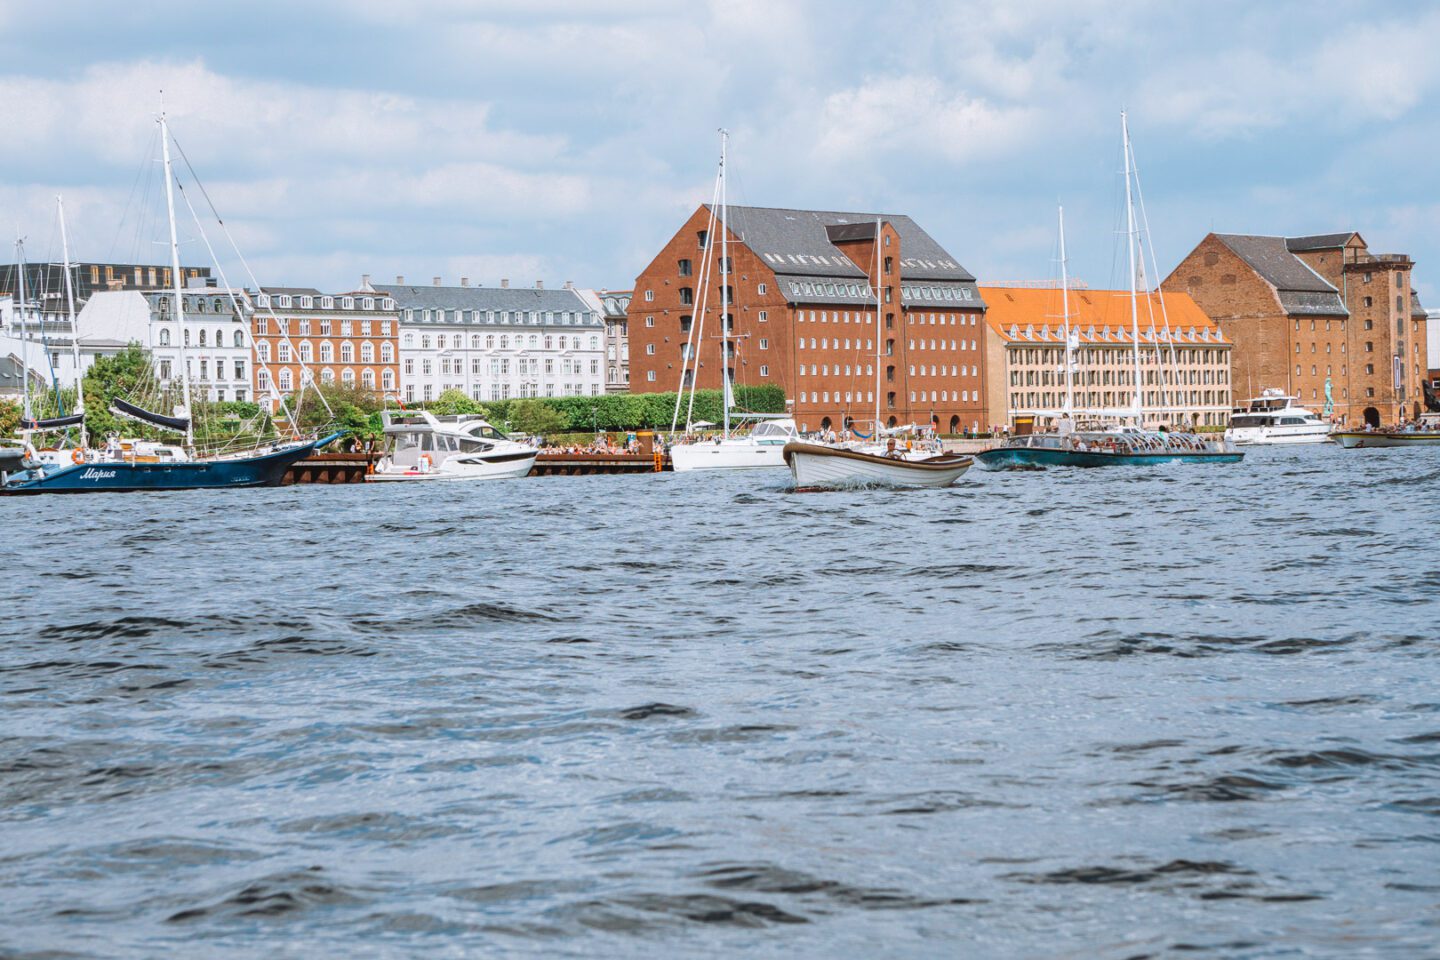 The Copenhagen skyline and boats in the canals, including one of the long canal boat tours that is a top thing to do in Copenhagen